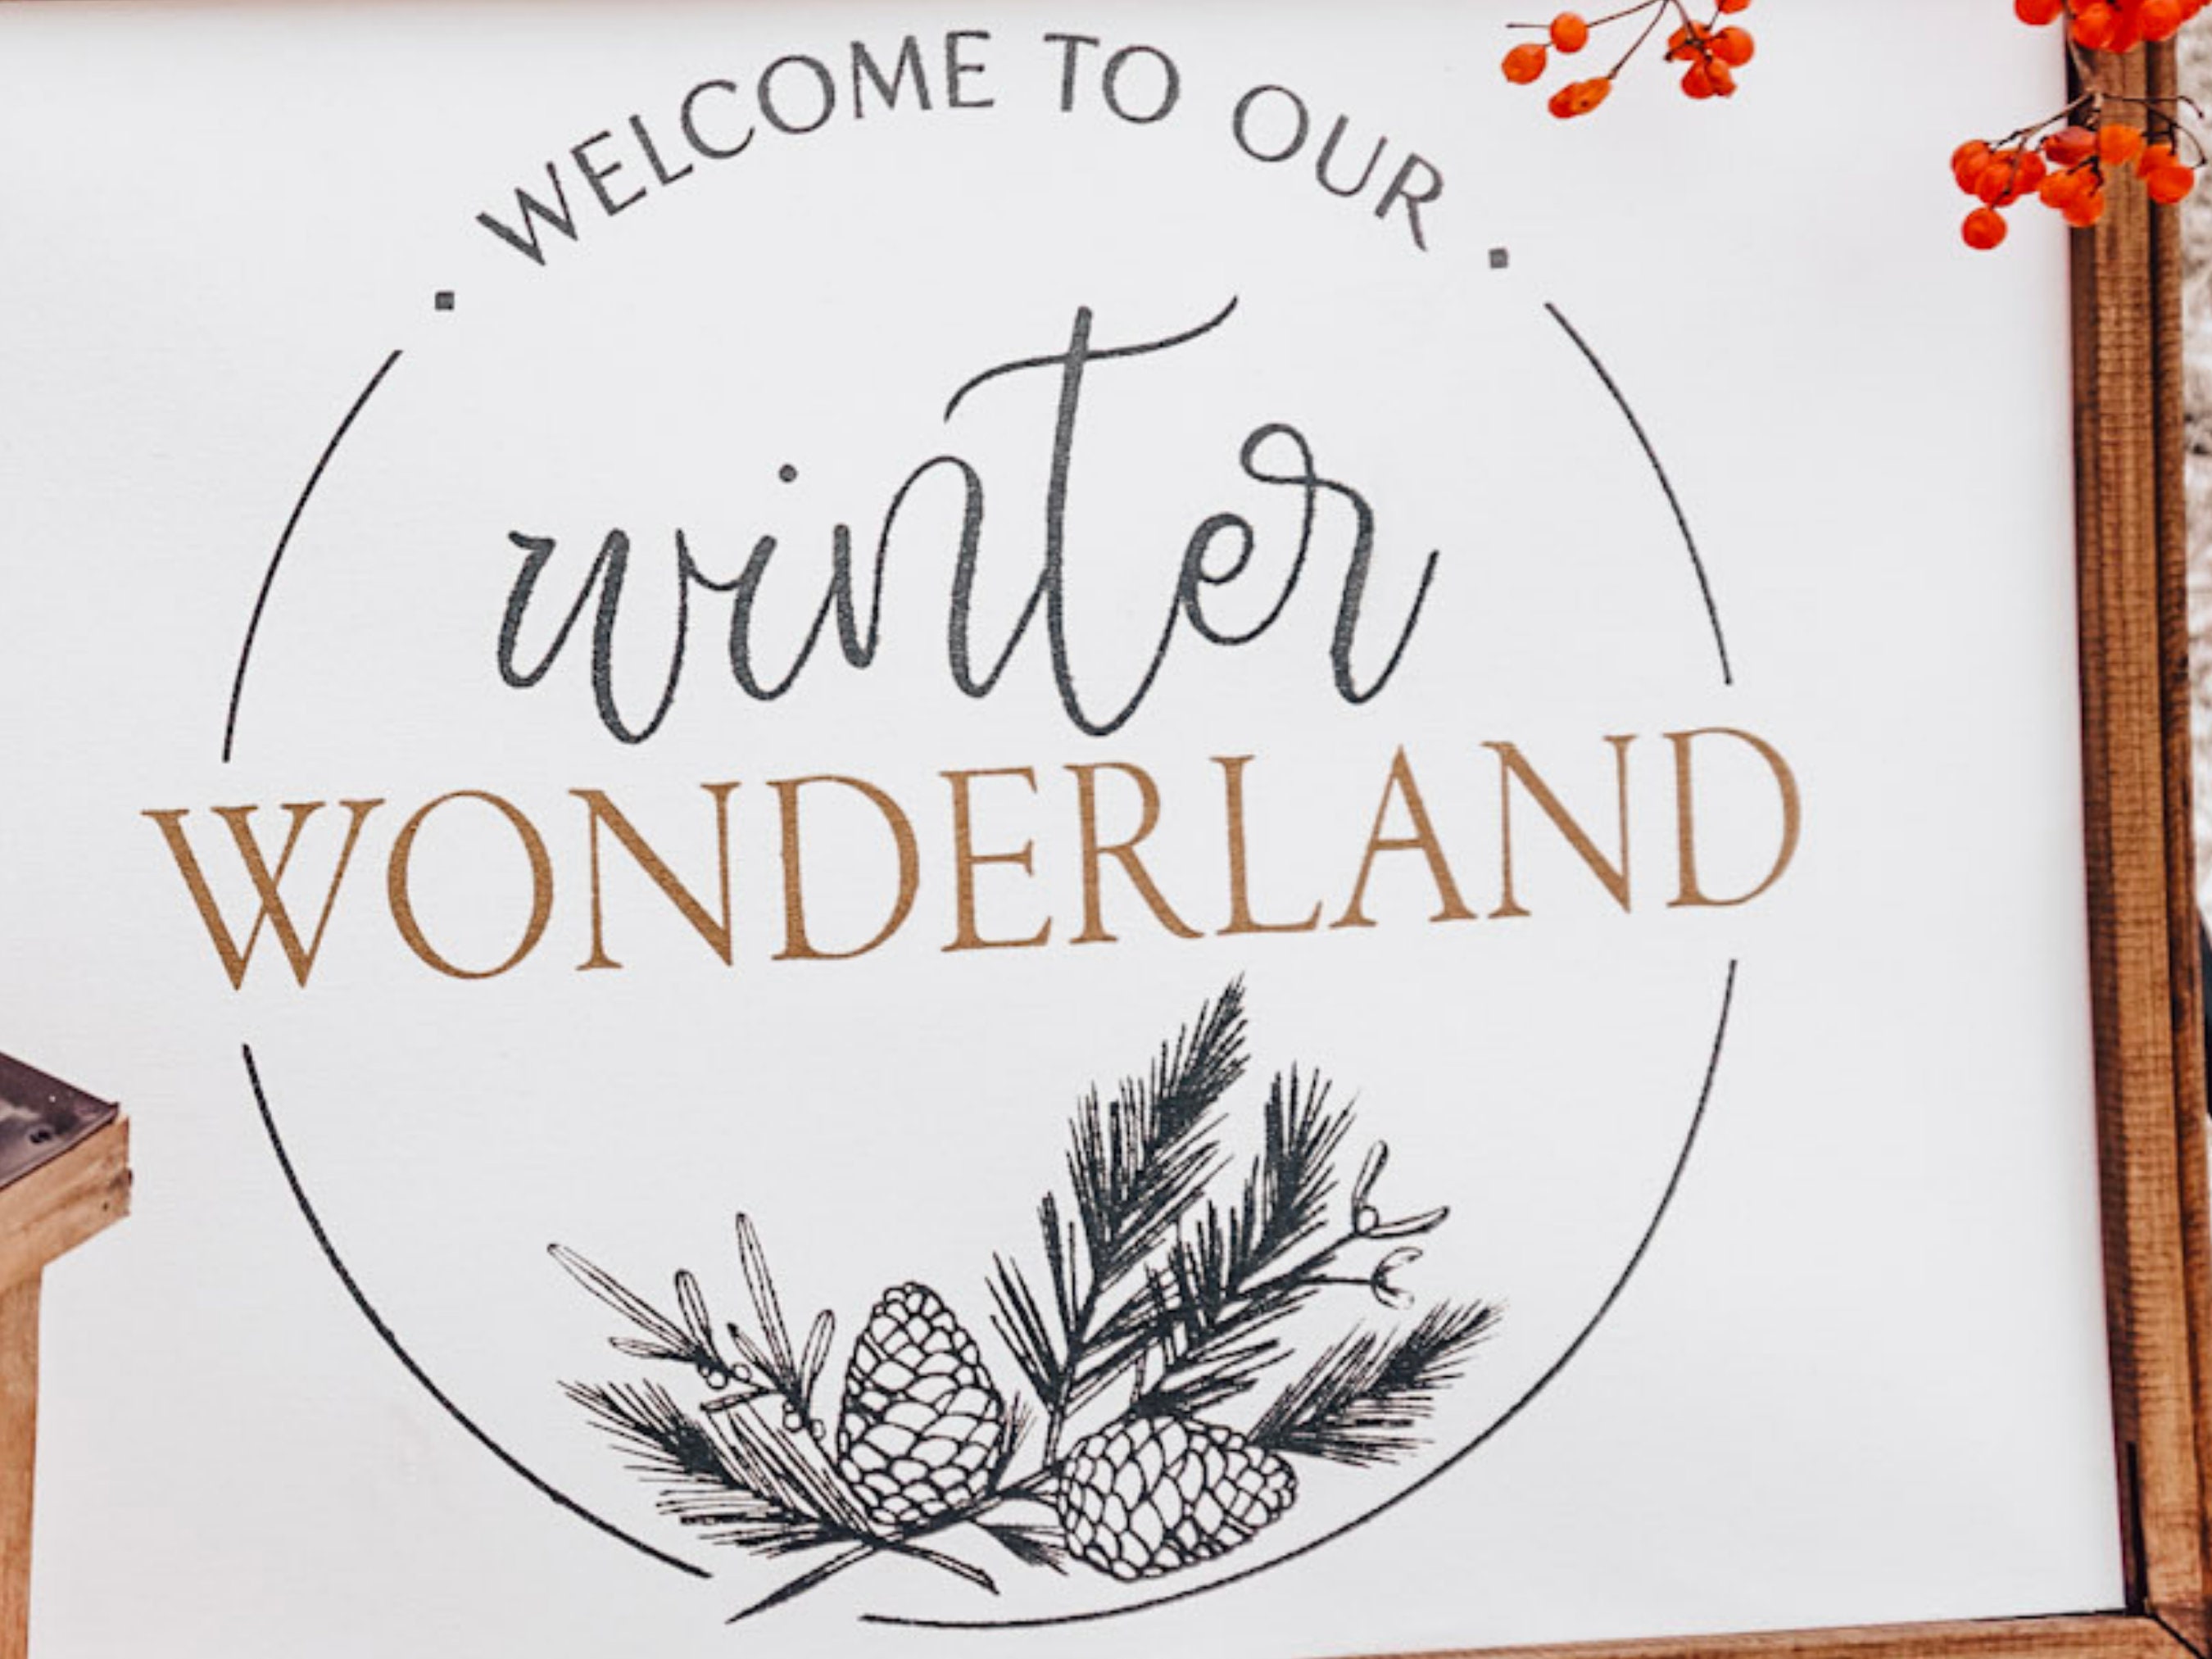 Welcome to Our Winter Wonderland Sign Farmhouse Christmas Décor Decorations  Wall Art Décor Home 8x12 208120097007